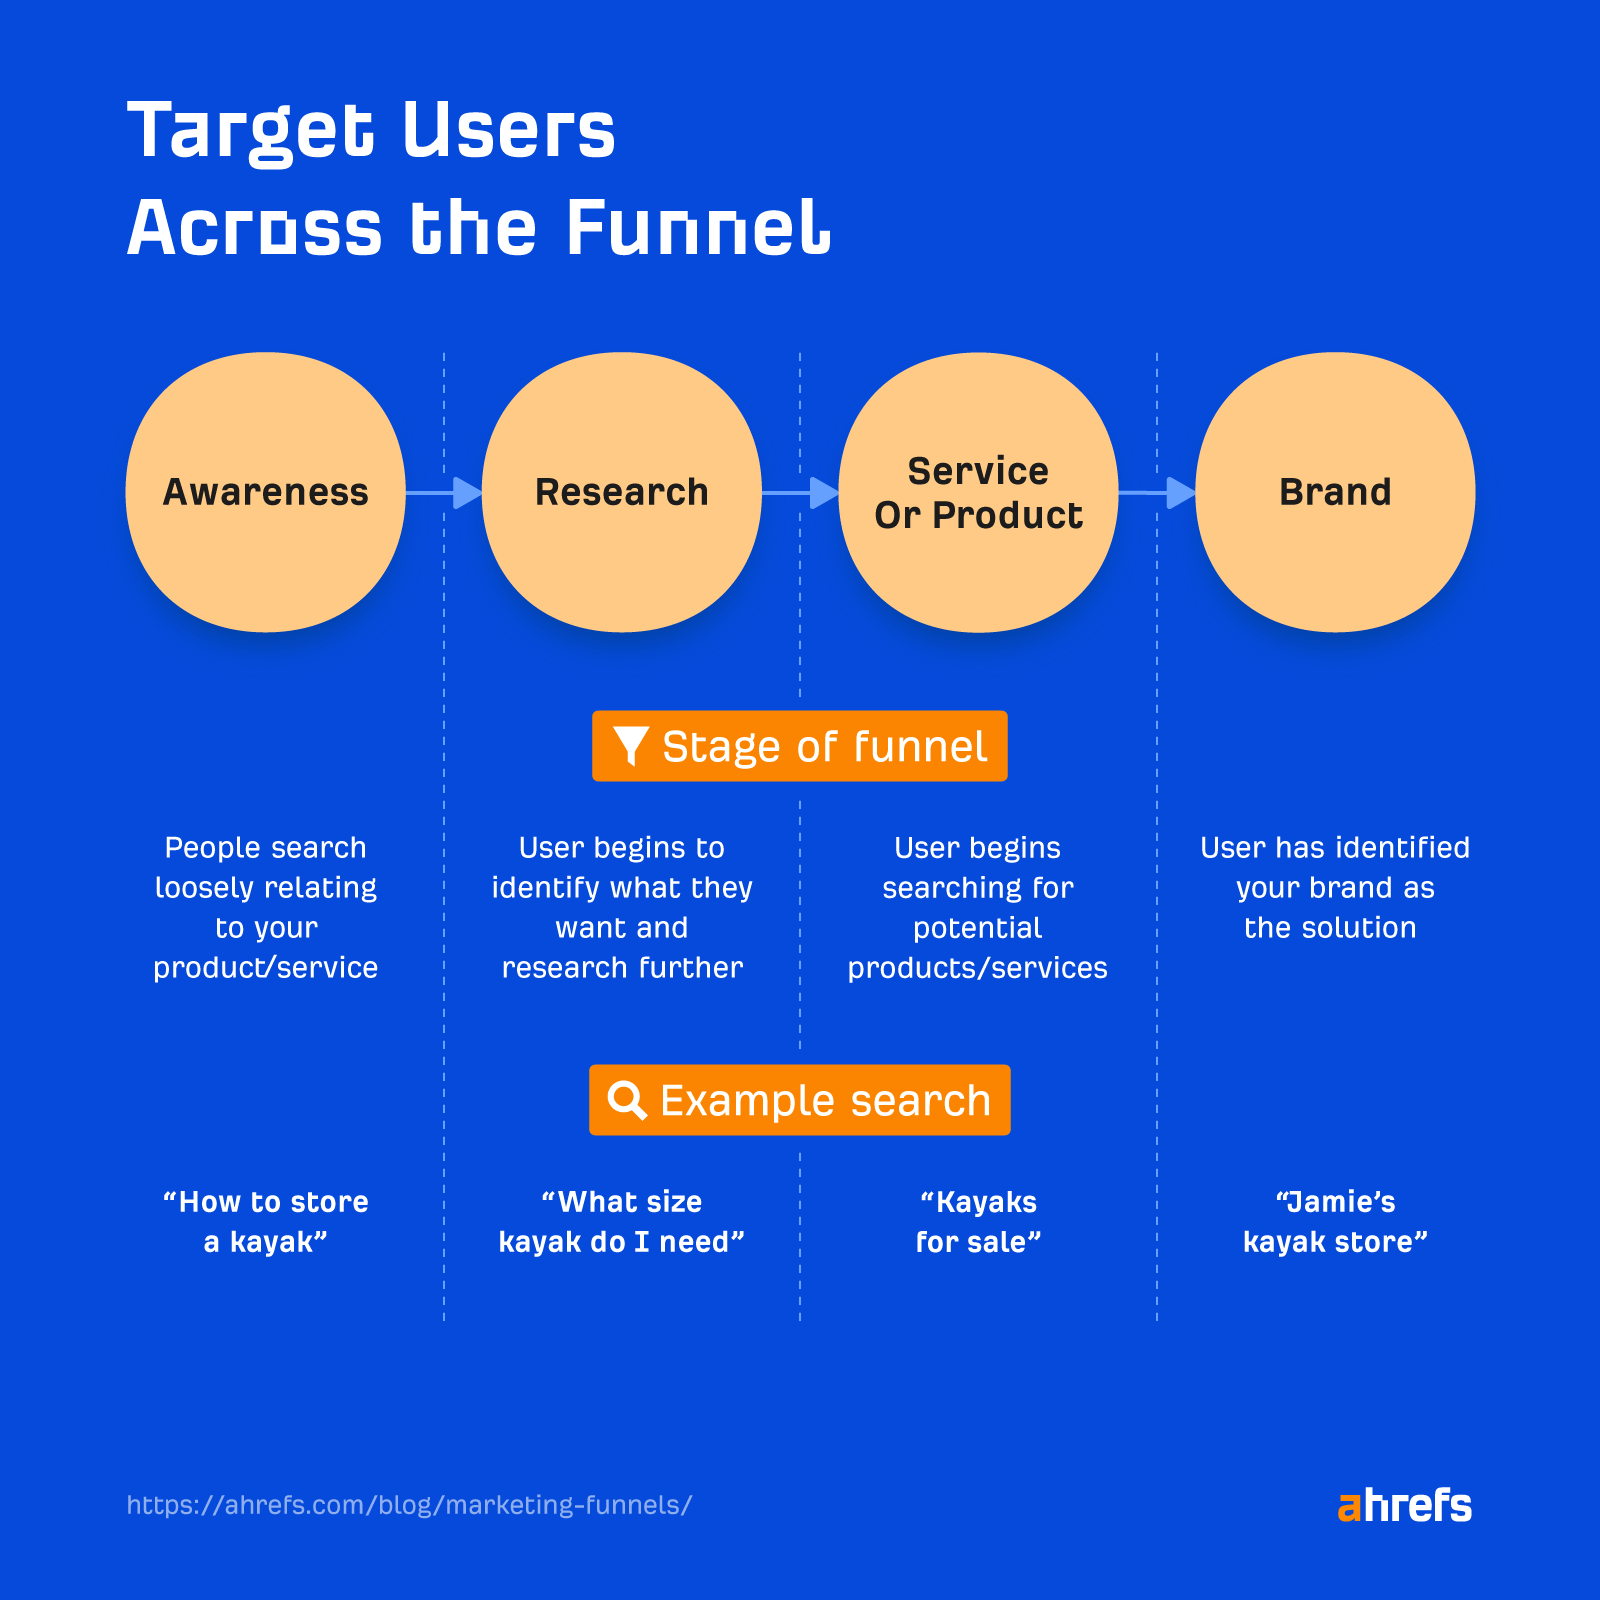 Marketing funnel stages and example searches at each stage